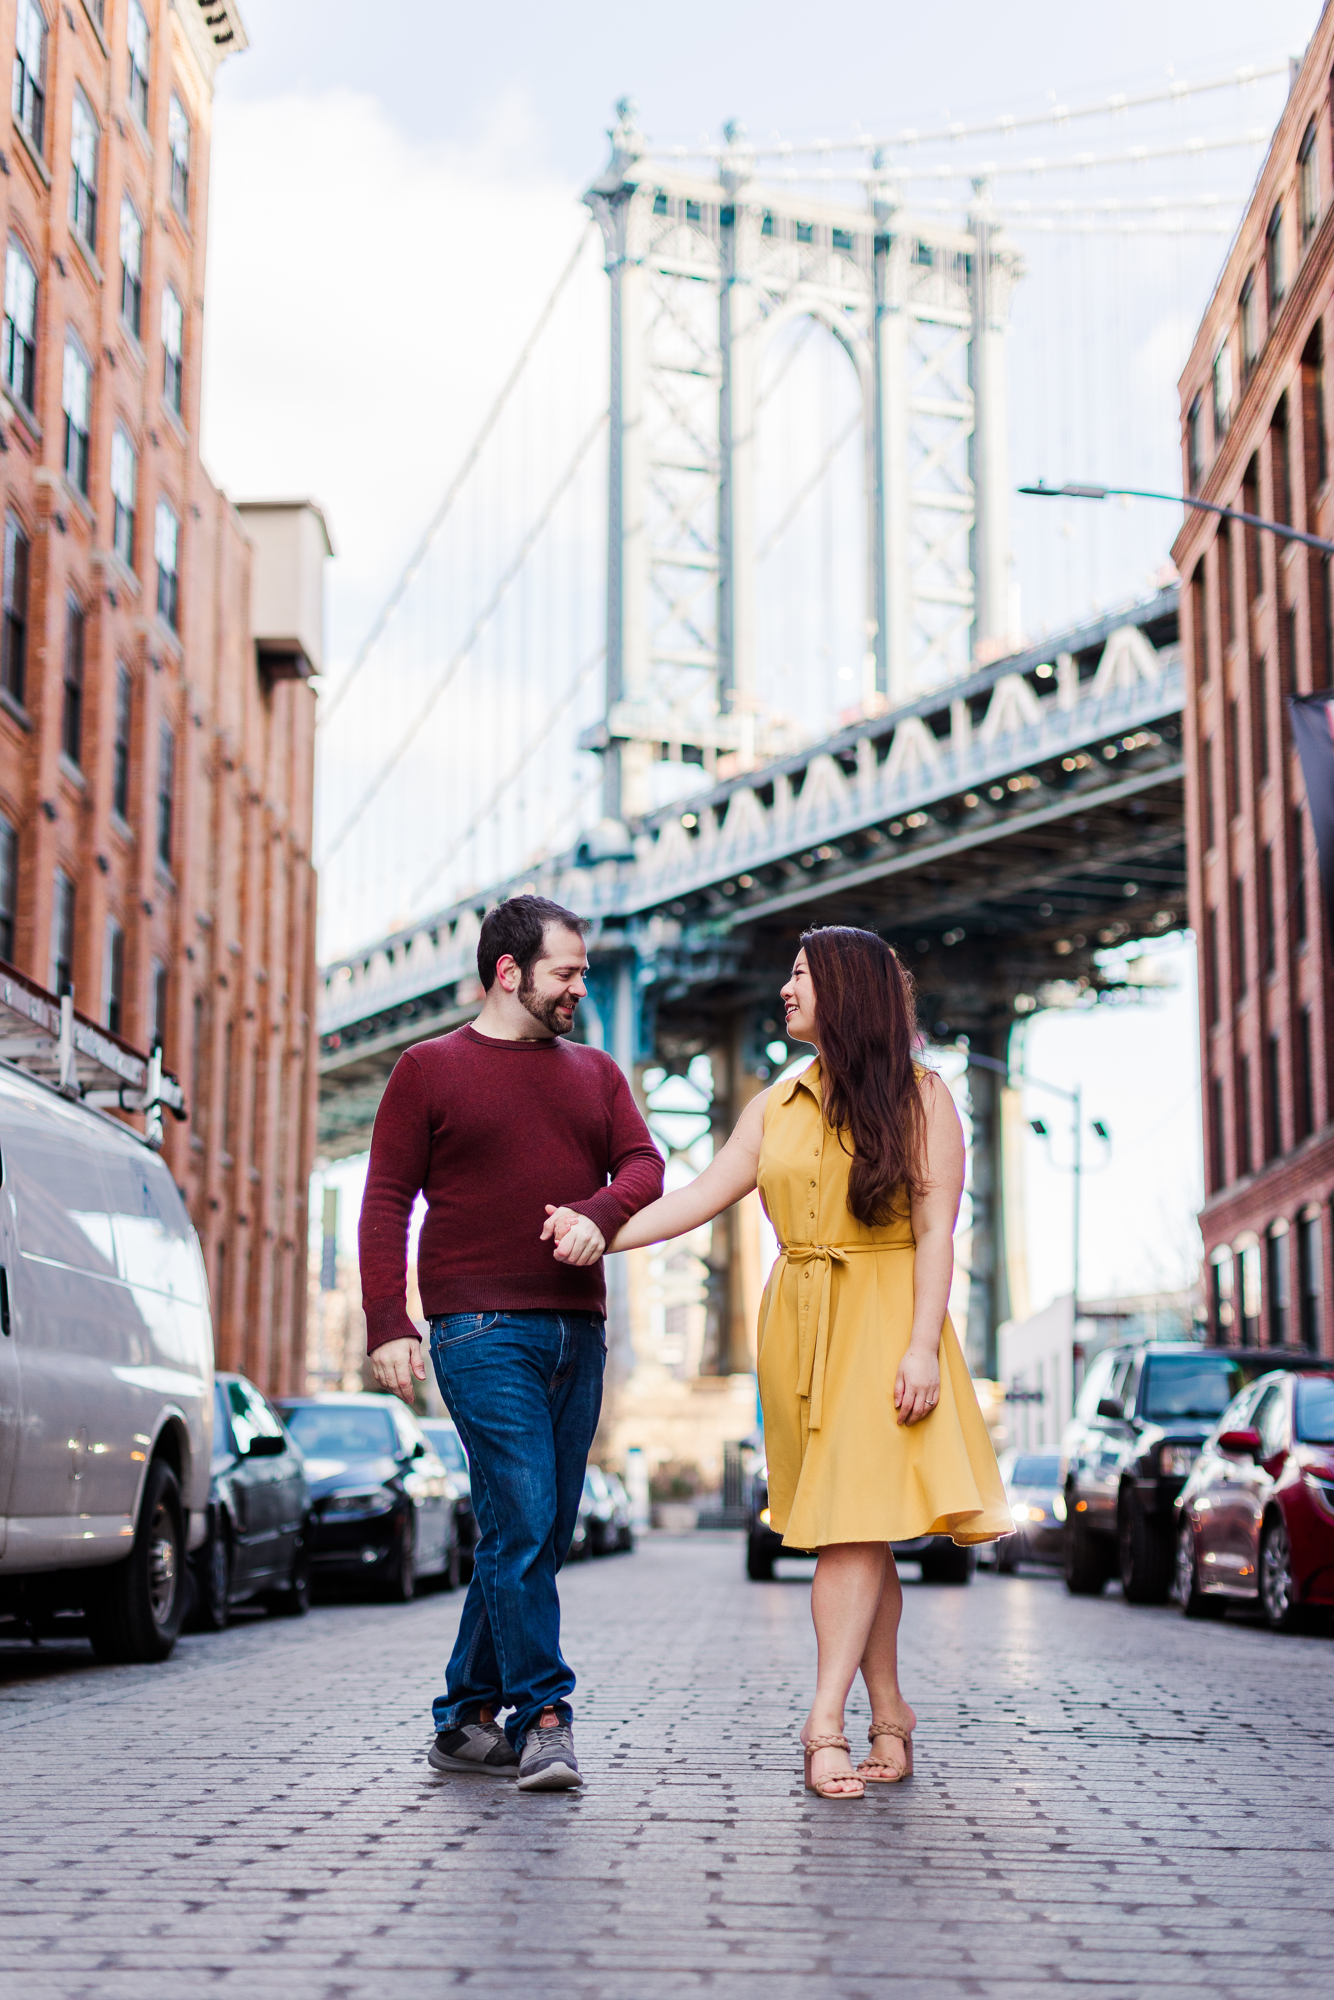 Lovely Brooklyn Bridge Engagement Photography with Matching Outfits